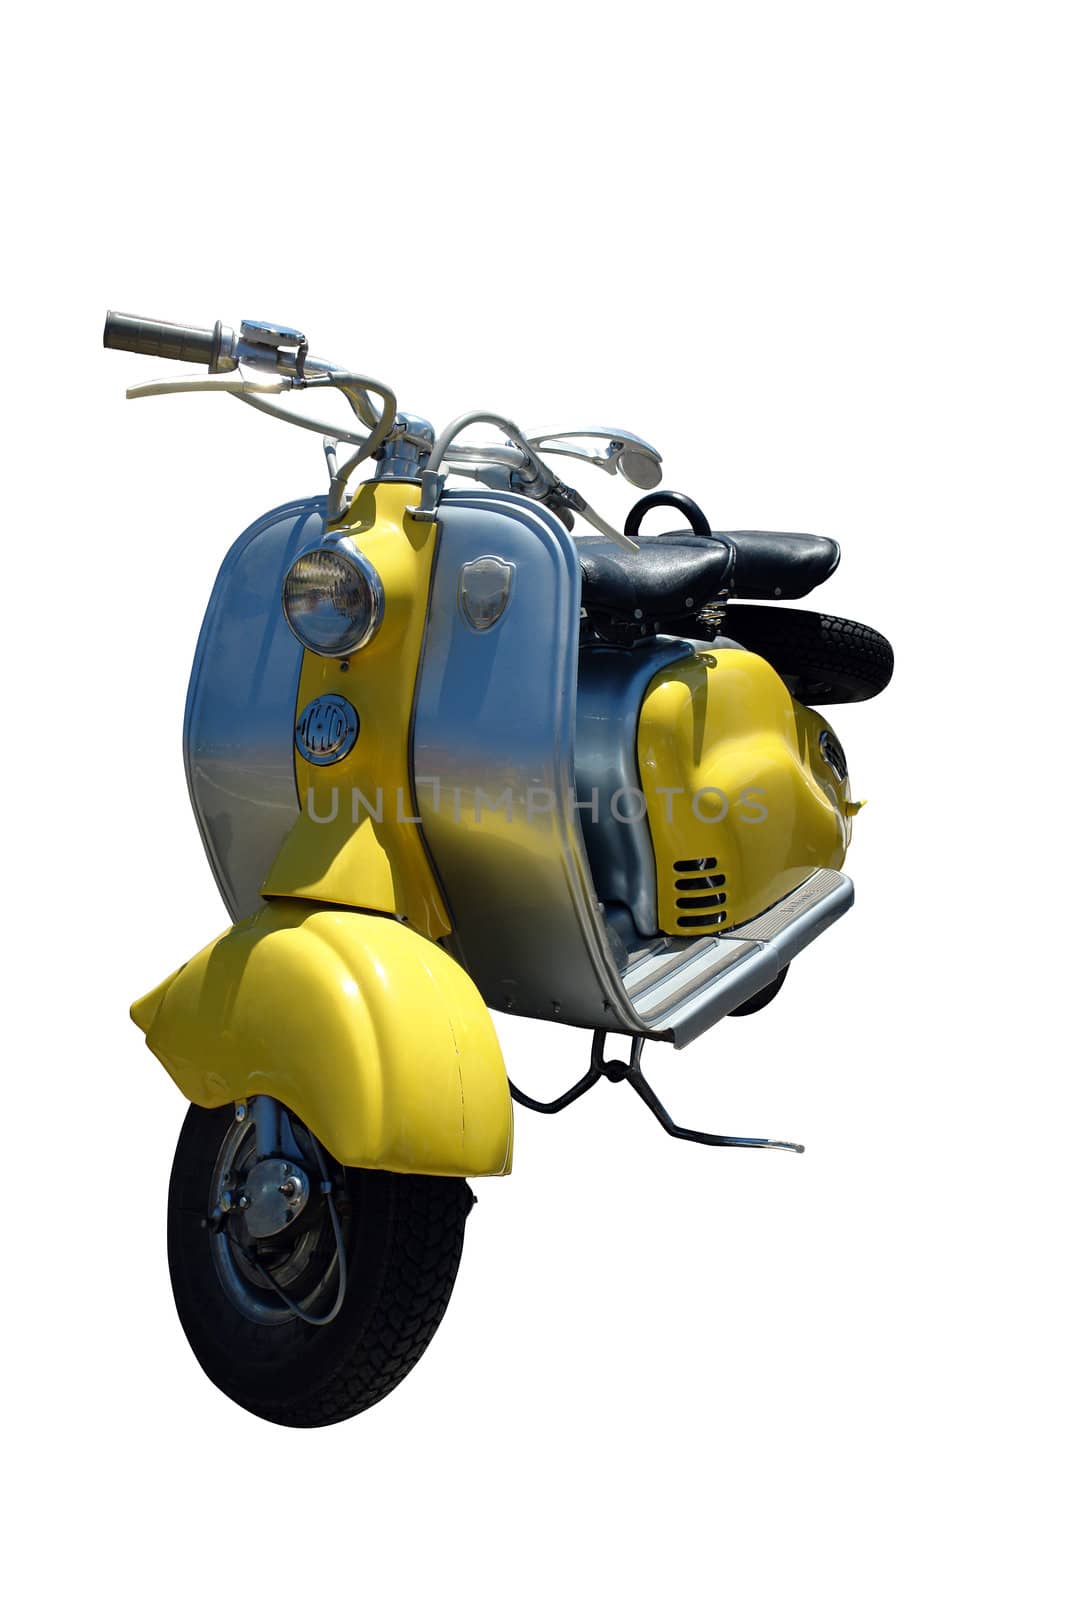 Vintage yellow scooter (path included) by simas2